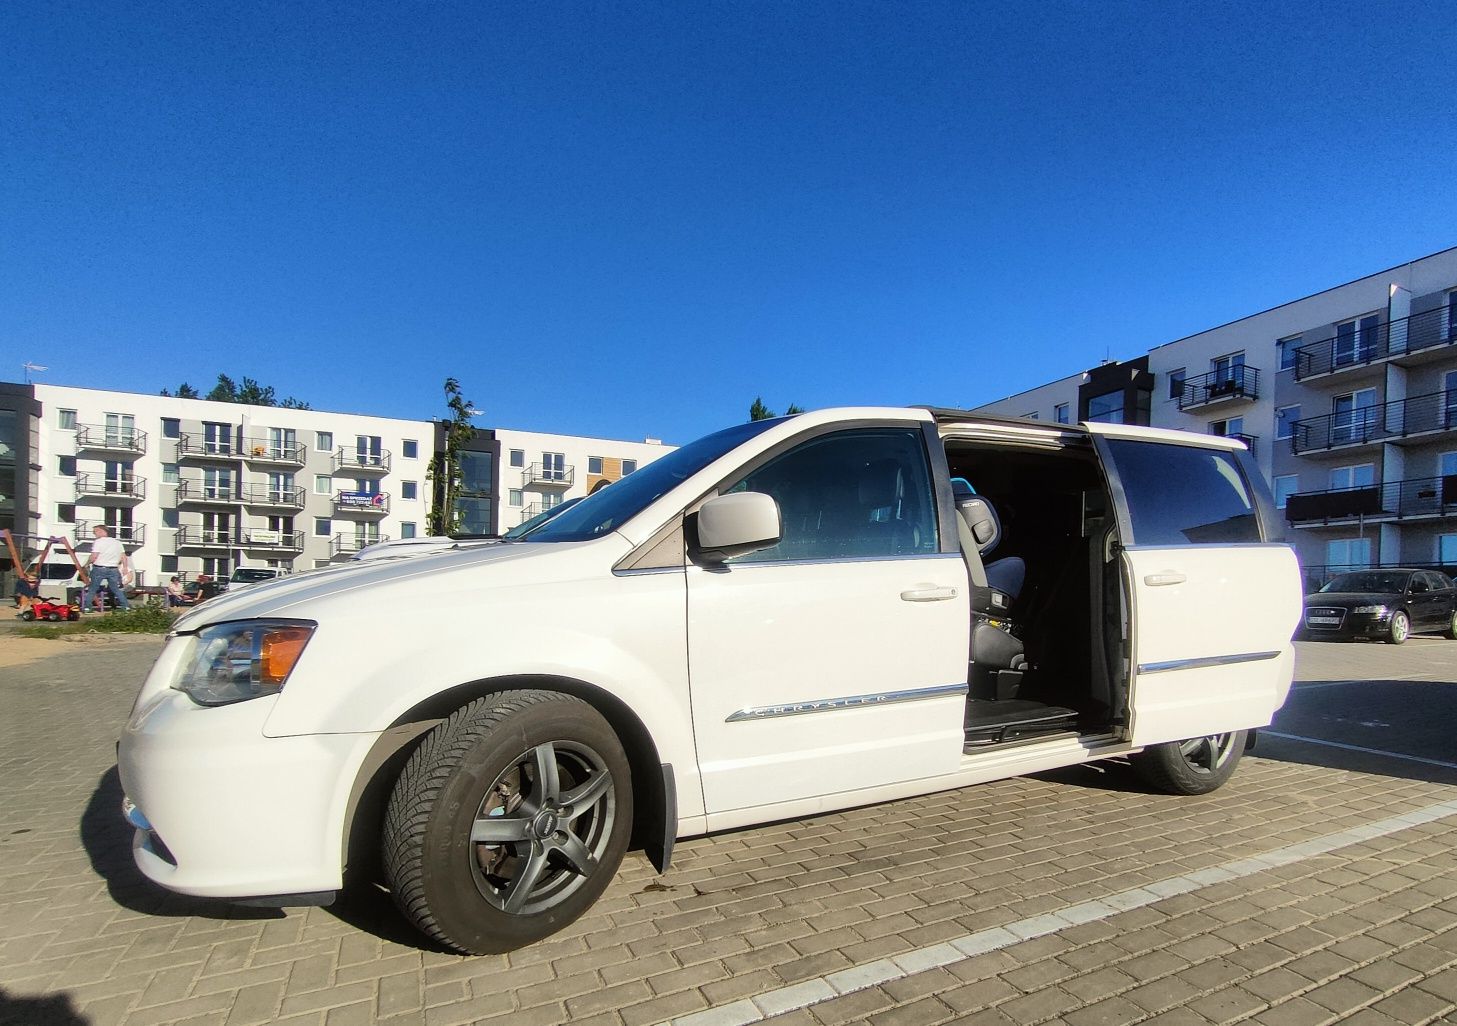 Chrysler Town & Country 3.6 Limited